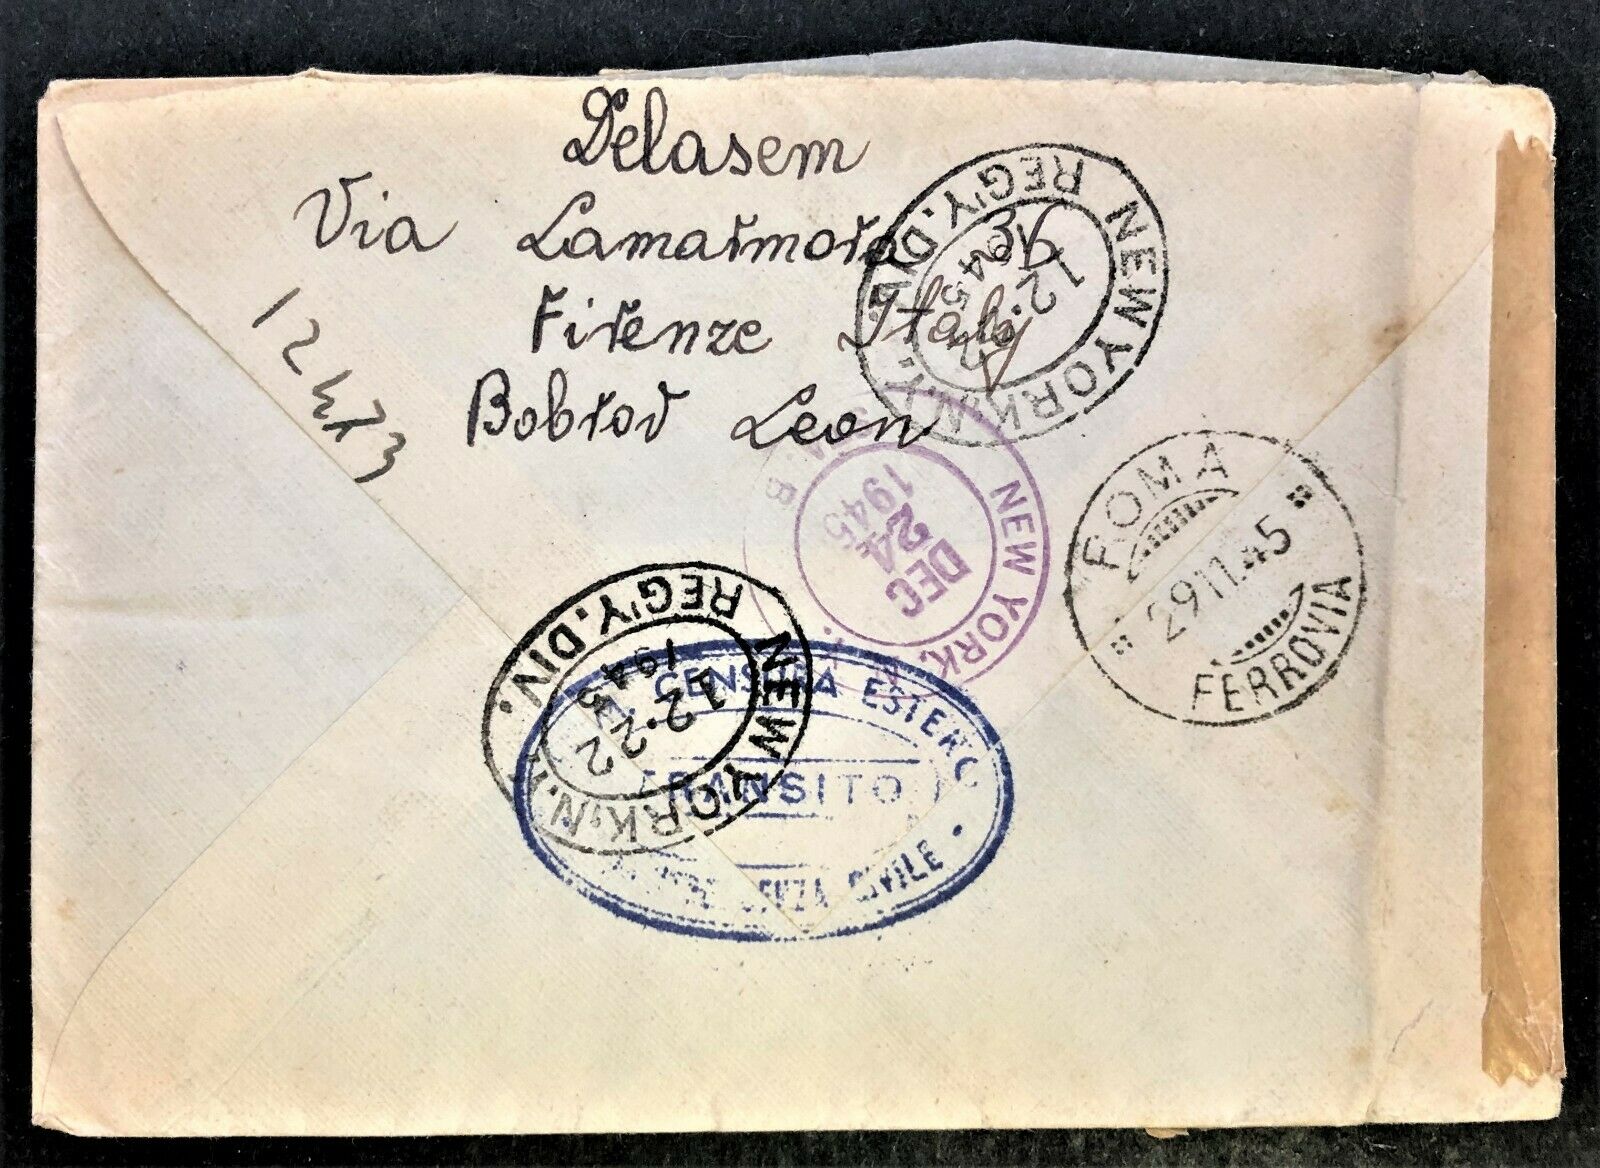 FIRENZE (FLORENCE) ITALY JEWISH DAILY FORWARD REGISTERED COVER DATED DEC 1945